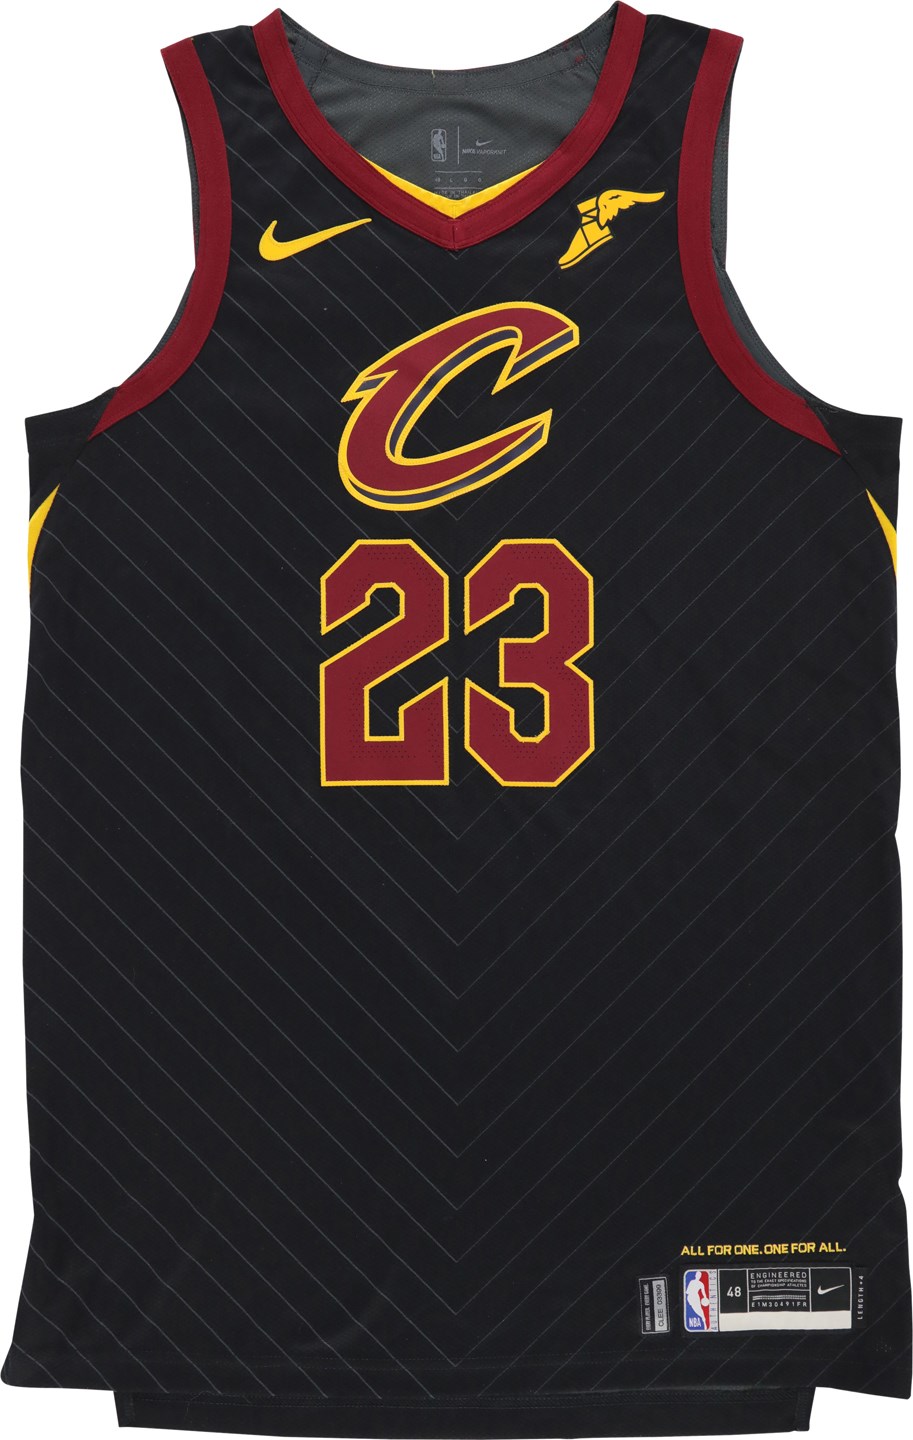 - 2017-18 LeBron James Cleveland Cavaliers "Statement" Game Issued Jersey